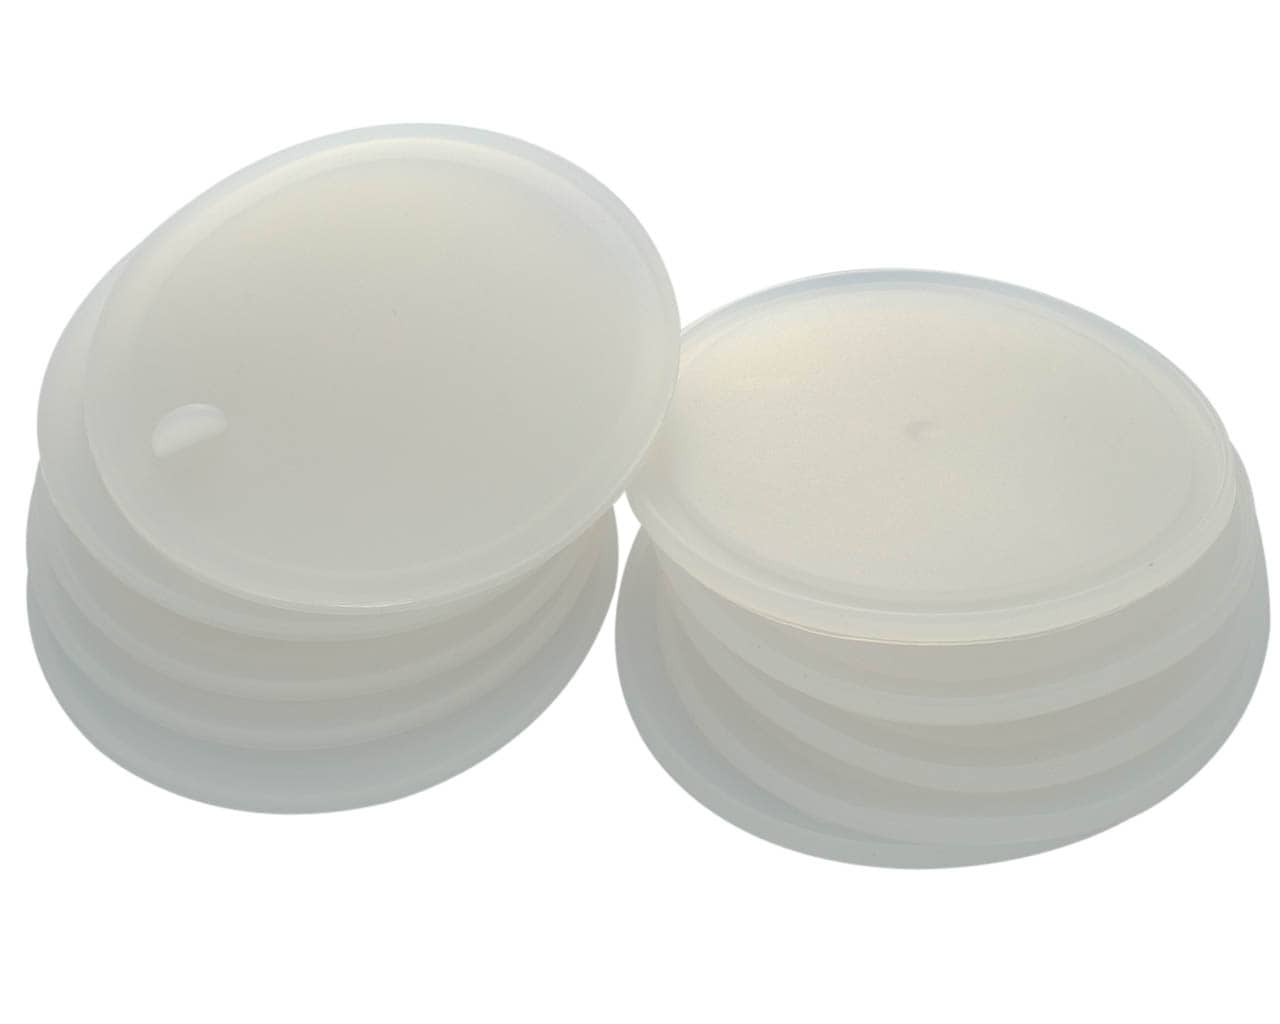 Leak Proof Platinum Silicone Sealing Lid Liners for Mason Jars 10 Pack